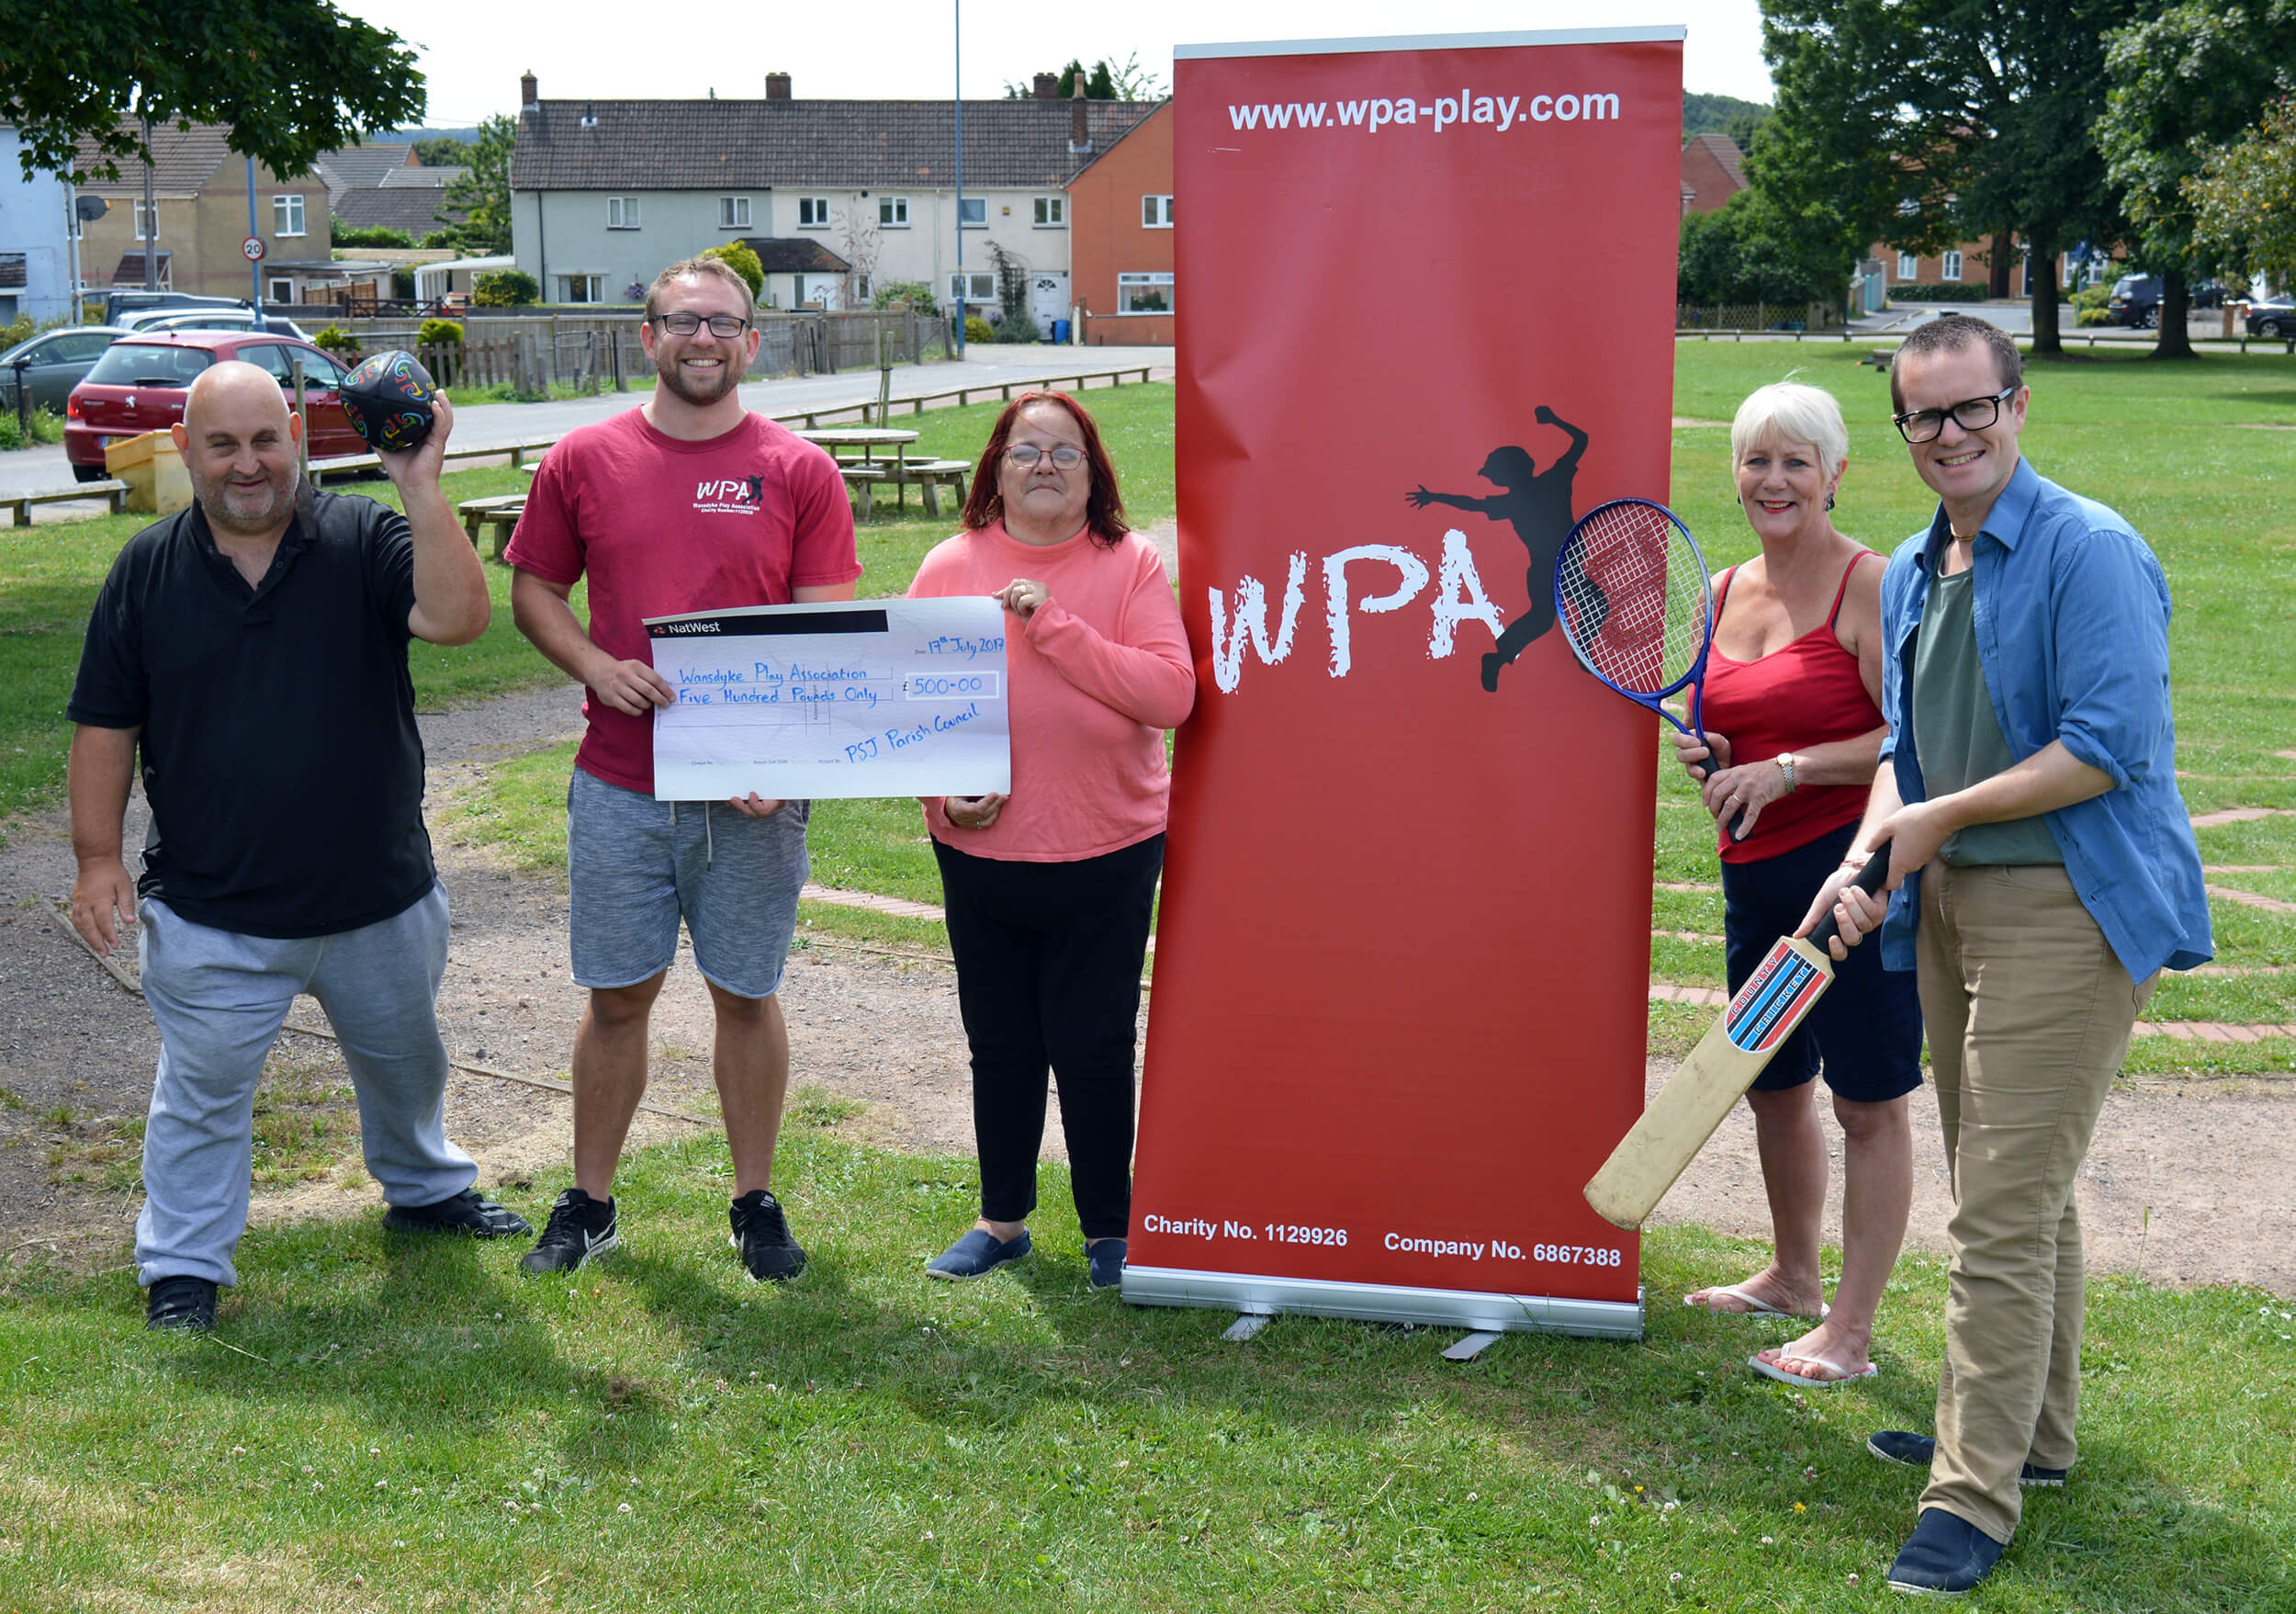 £1,000 gift funds four summer play days in Peasedown St John